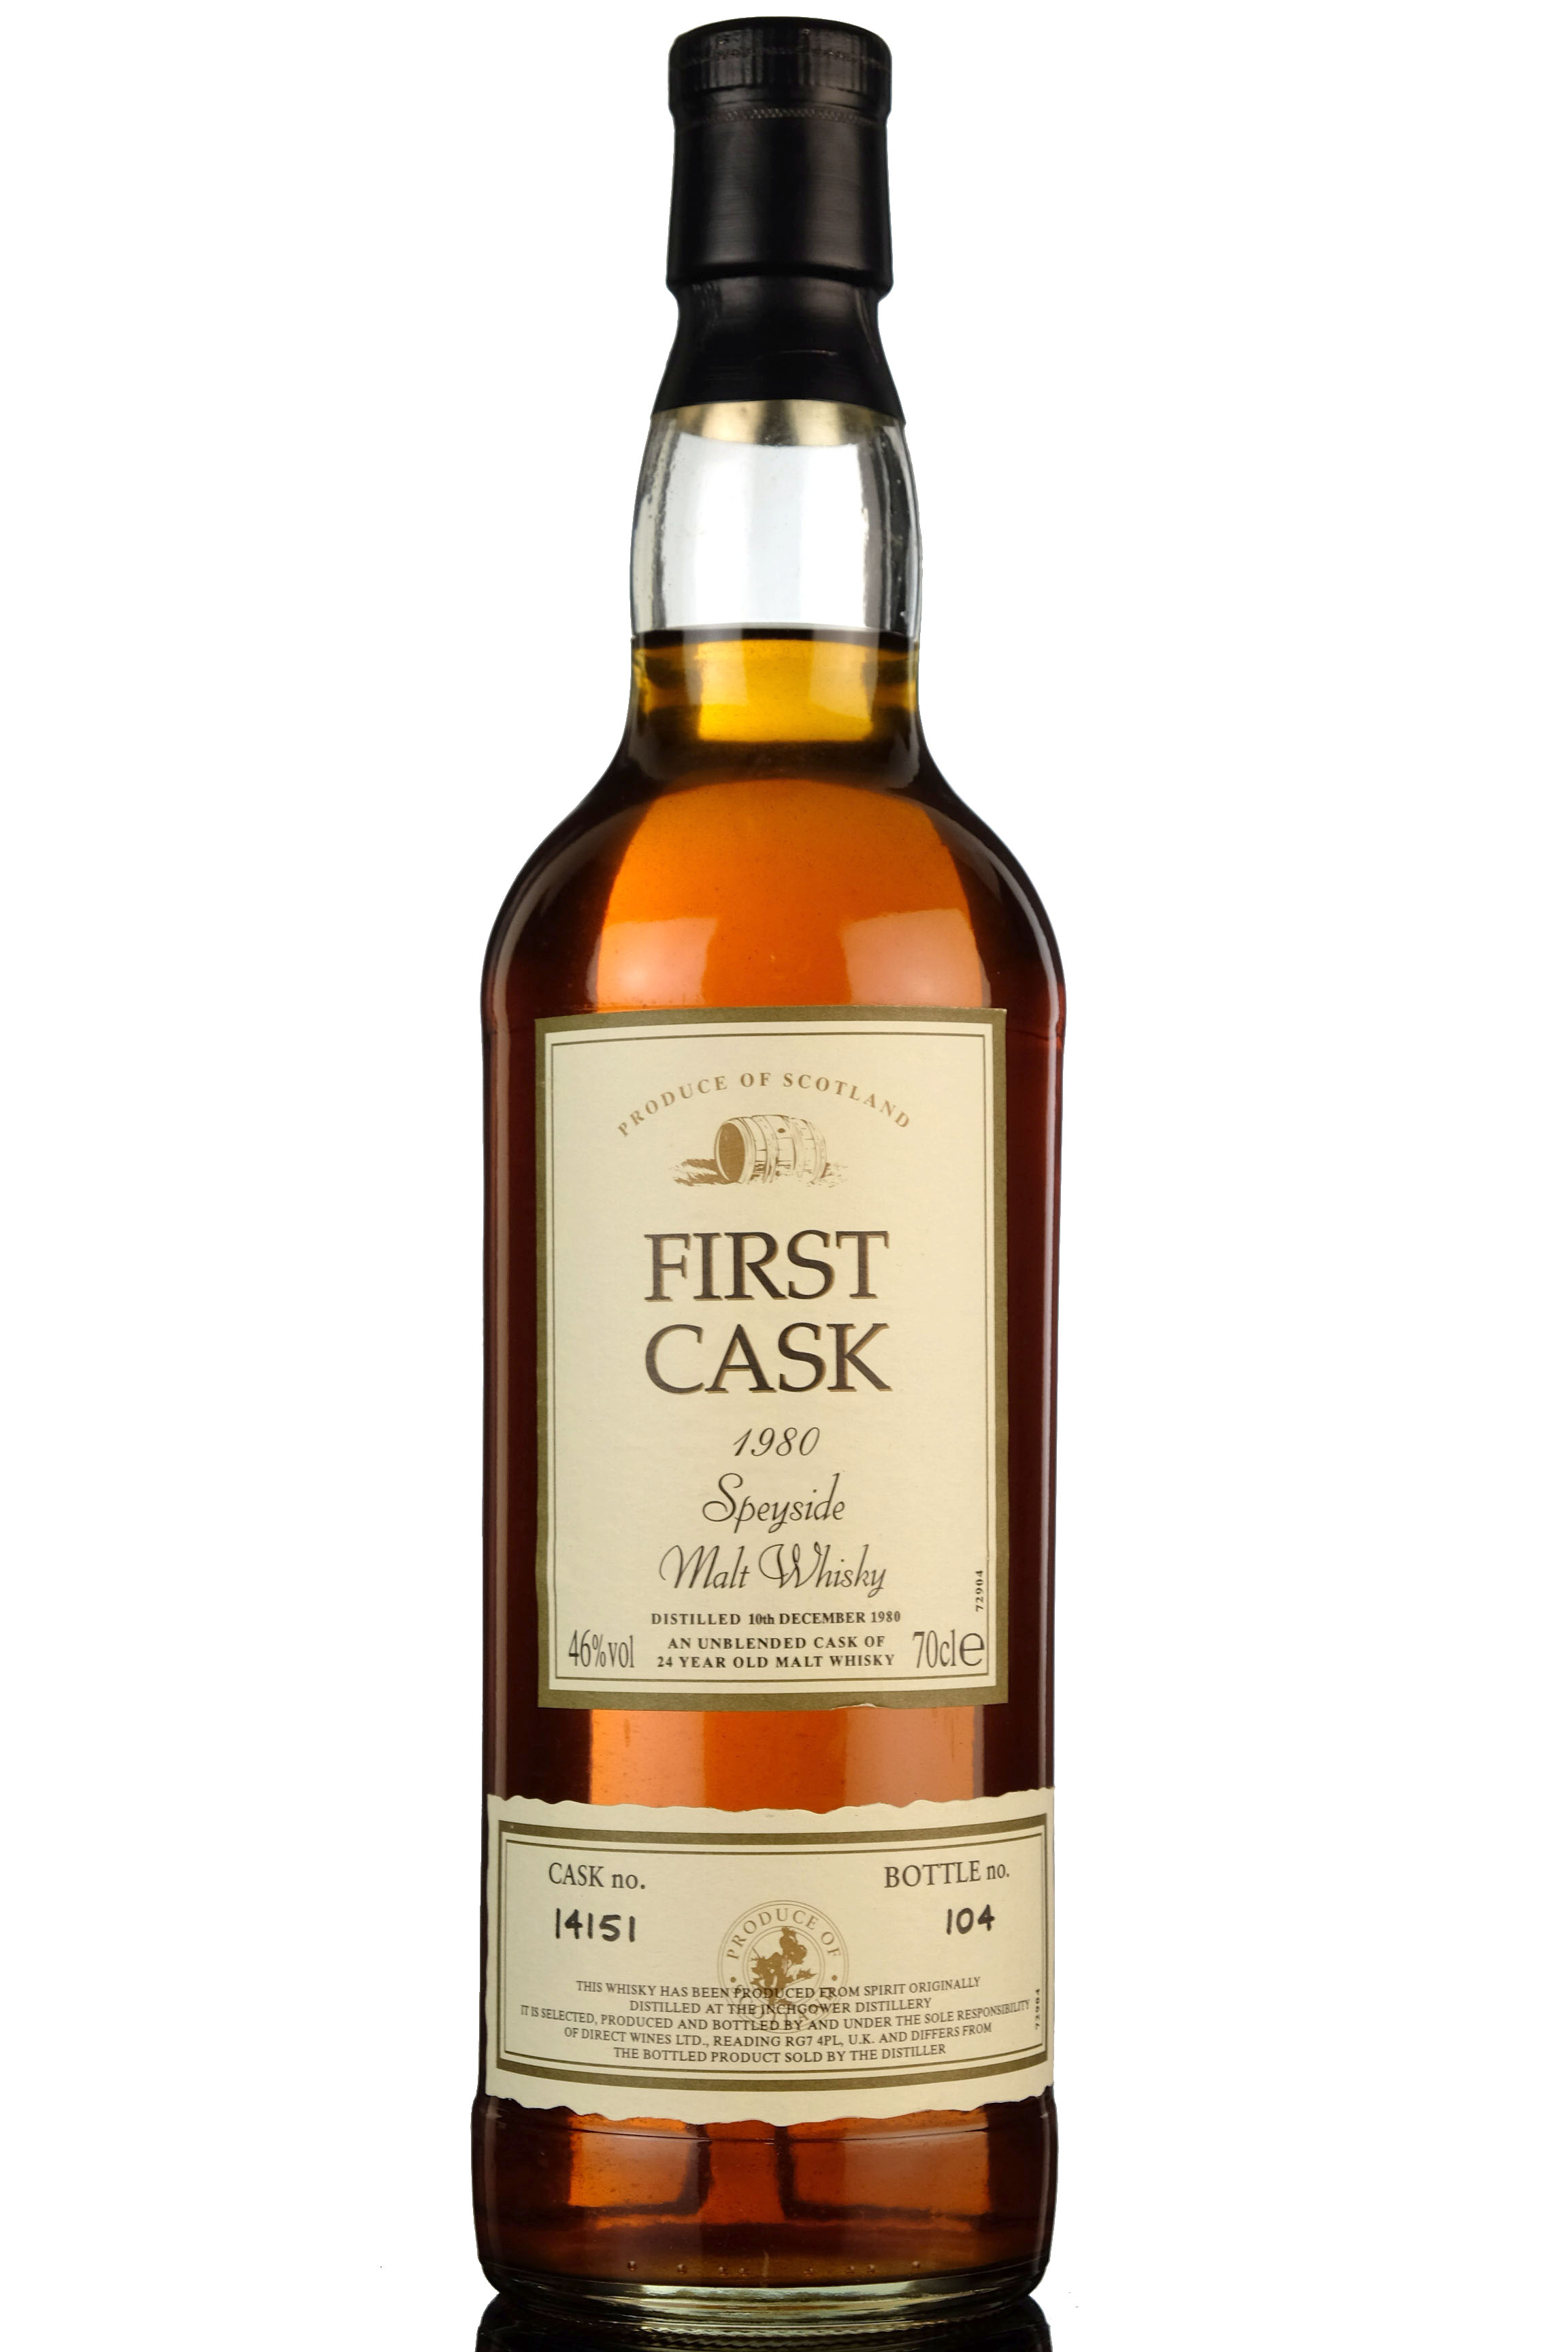 Inchgower 1980 - 24 Year Old - First Cask 14151